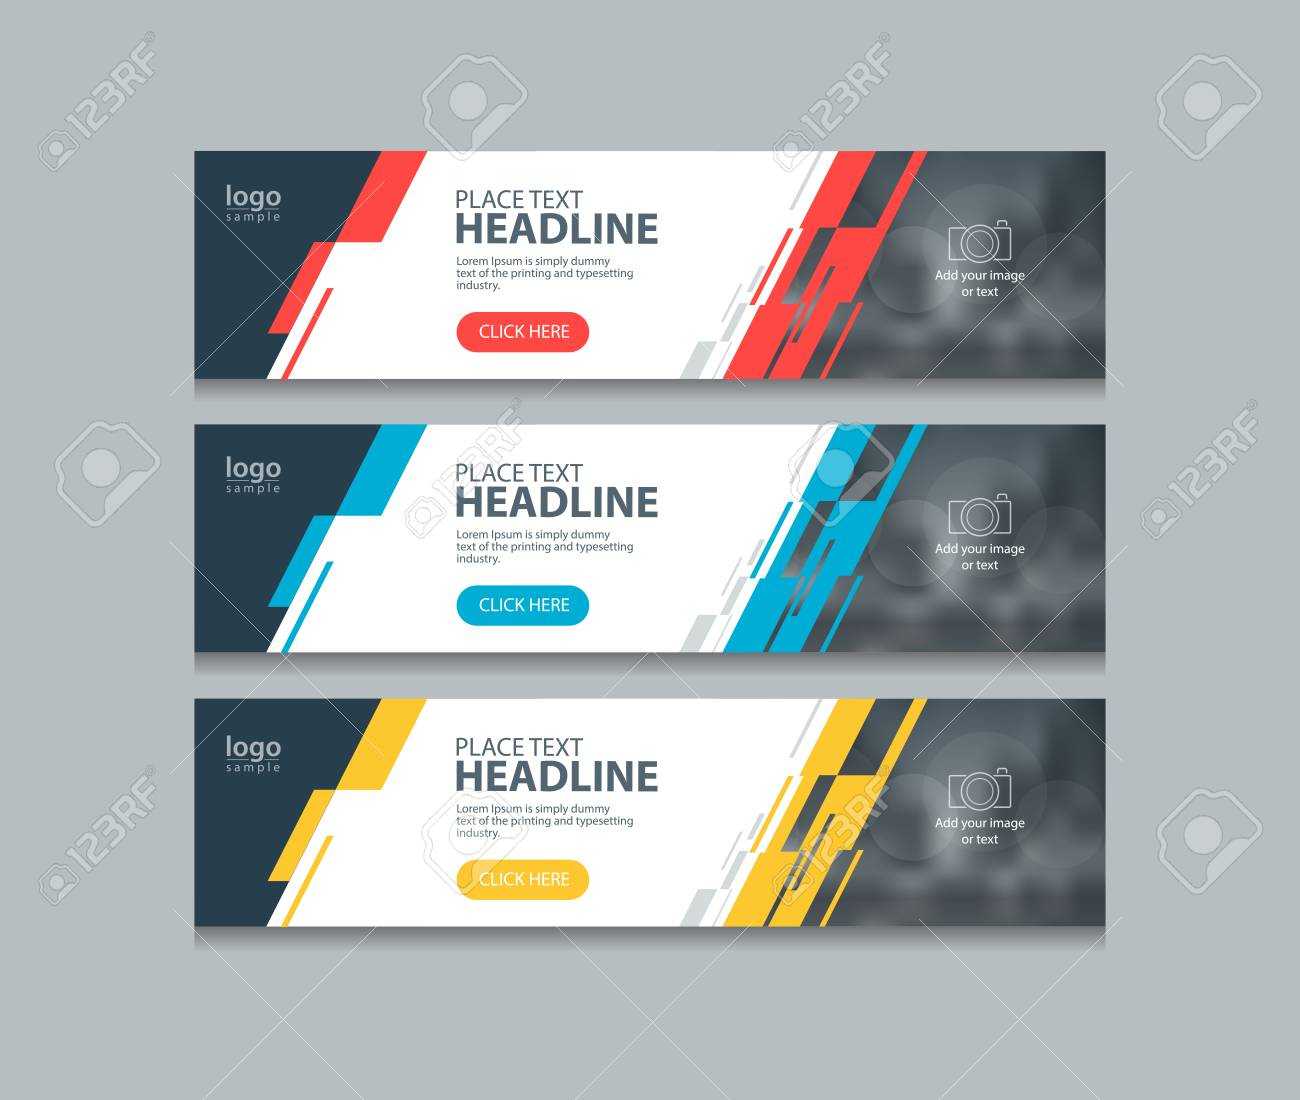 Abstract Horizontal Web Banner Design Template Backgrounds Intended For Website Banner Design Templates